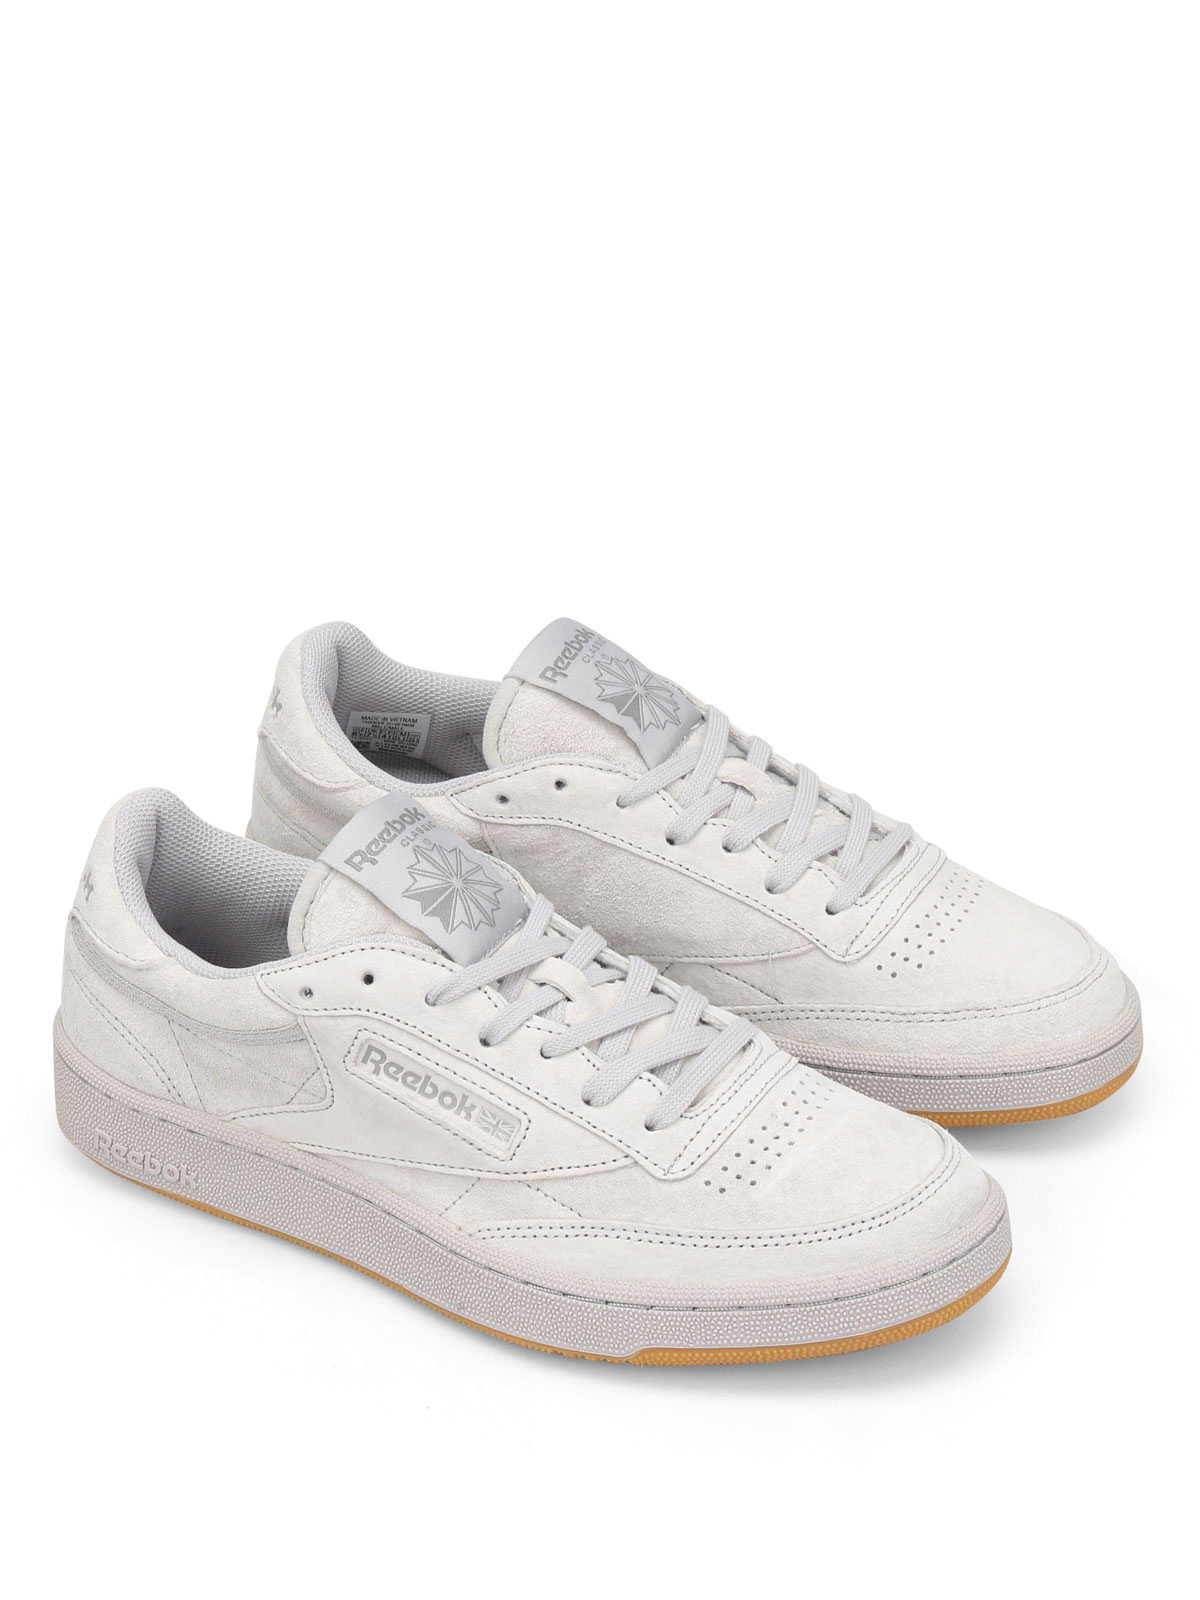 Trainers Club C 85 sneakers - BD1886